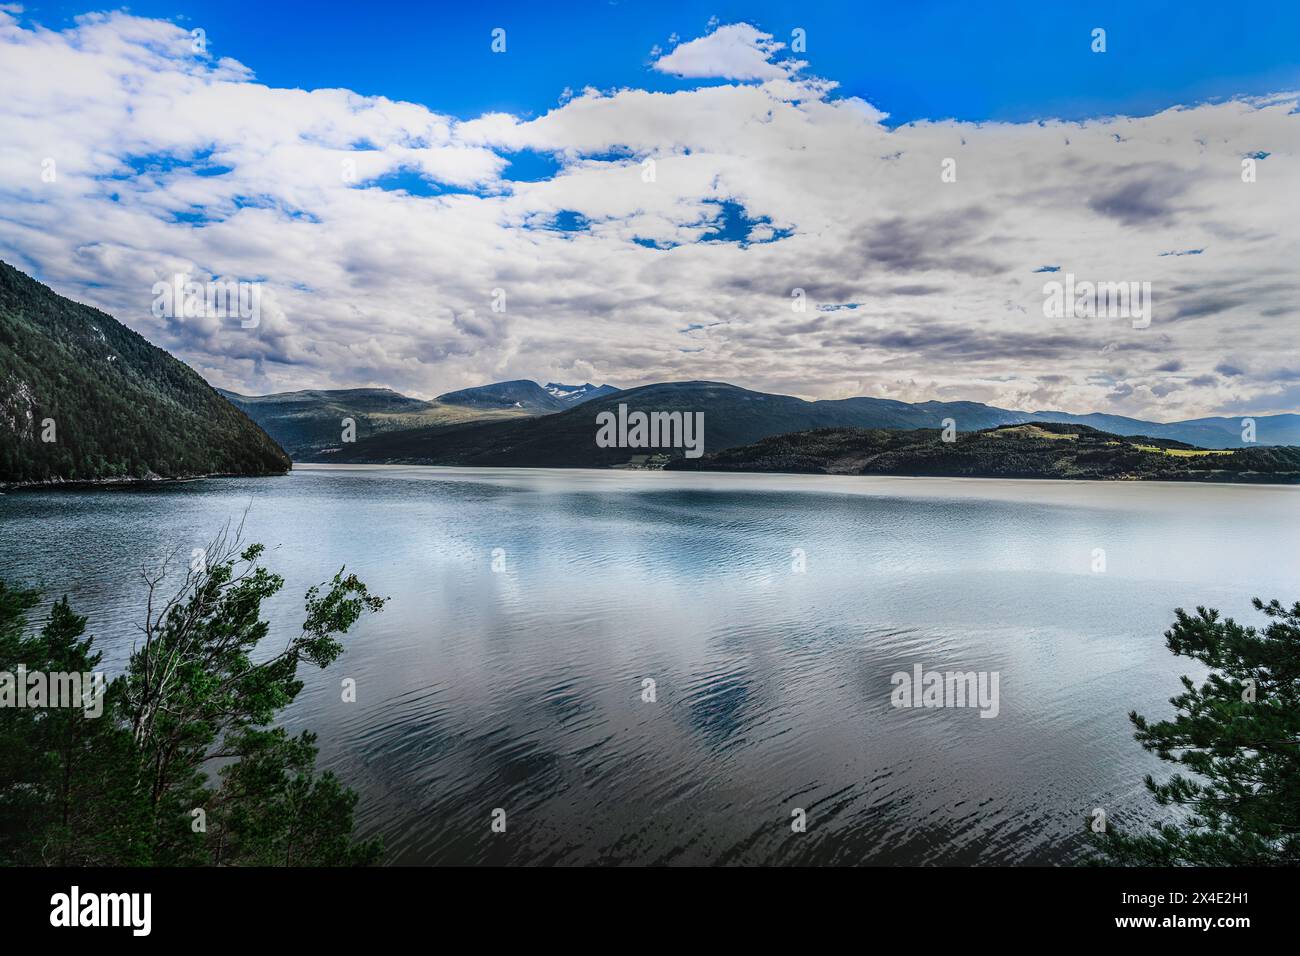 Serene view over Tingvollfjorden in Norway, featuring calm waters with reflections under a blue summer cloud sky. Stock Photo